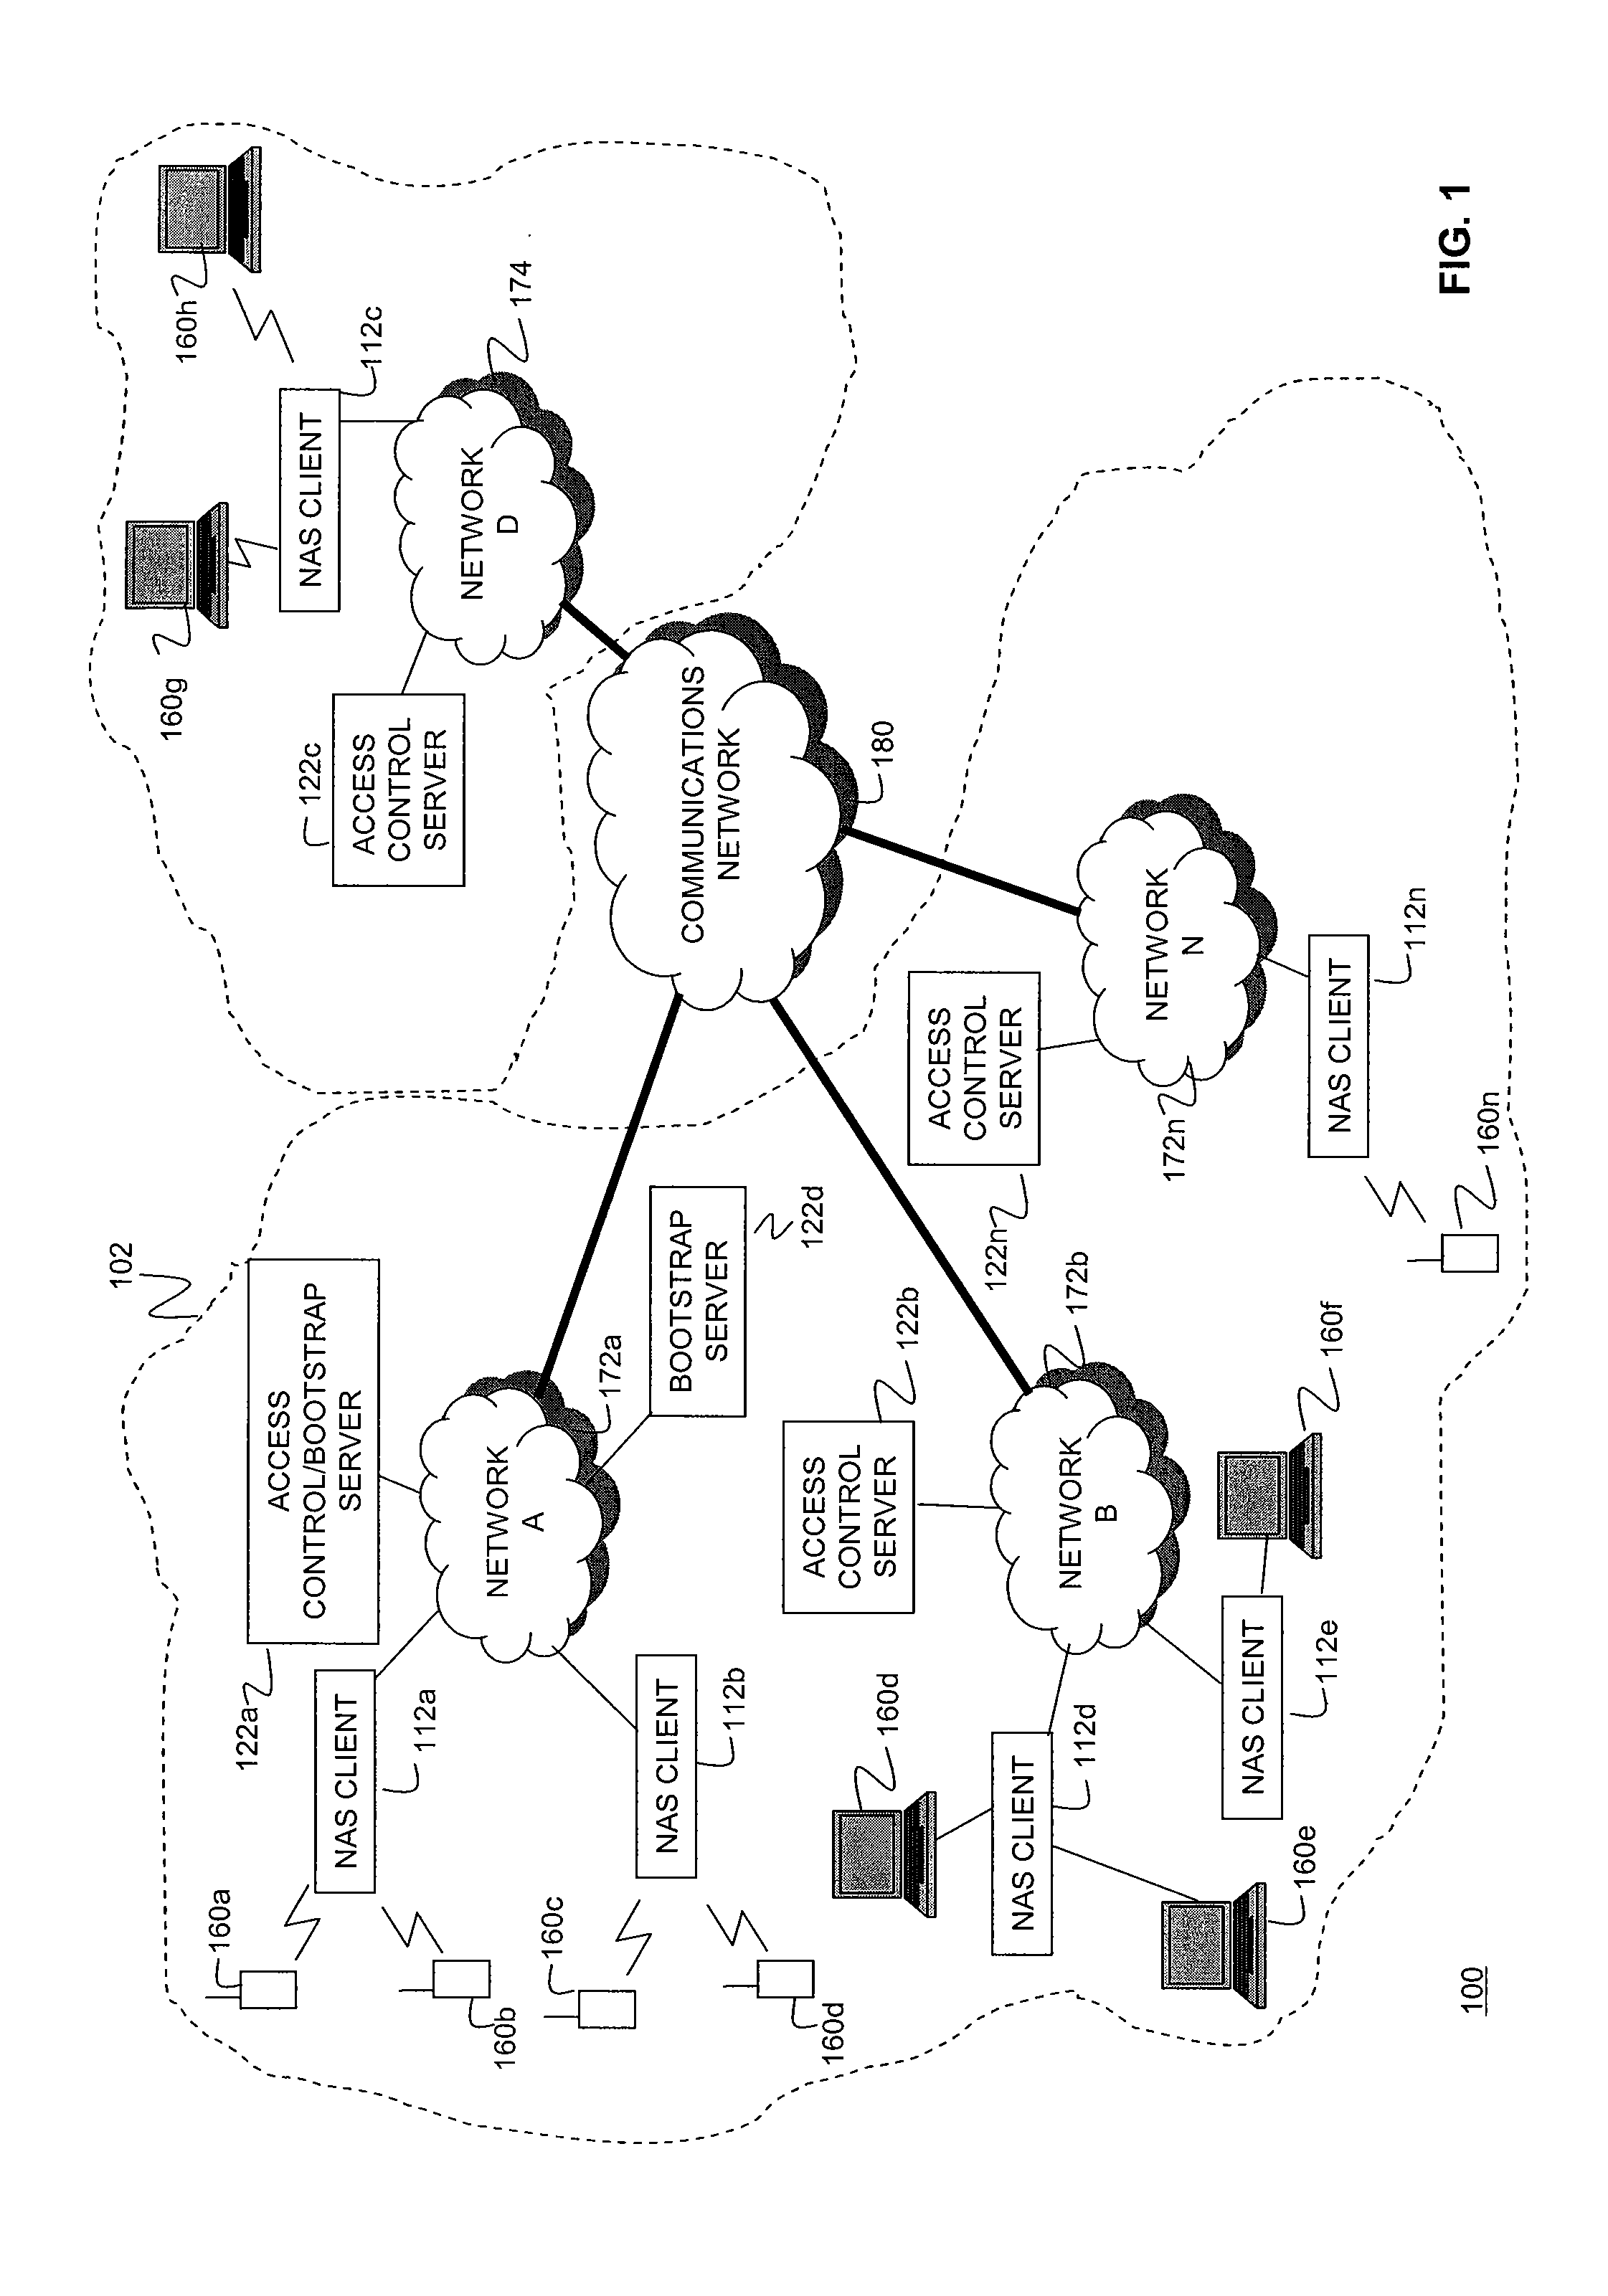 Systems and Methods for Server Load Balancing Using Authentication, Authorization, and Accounting Protocols